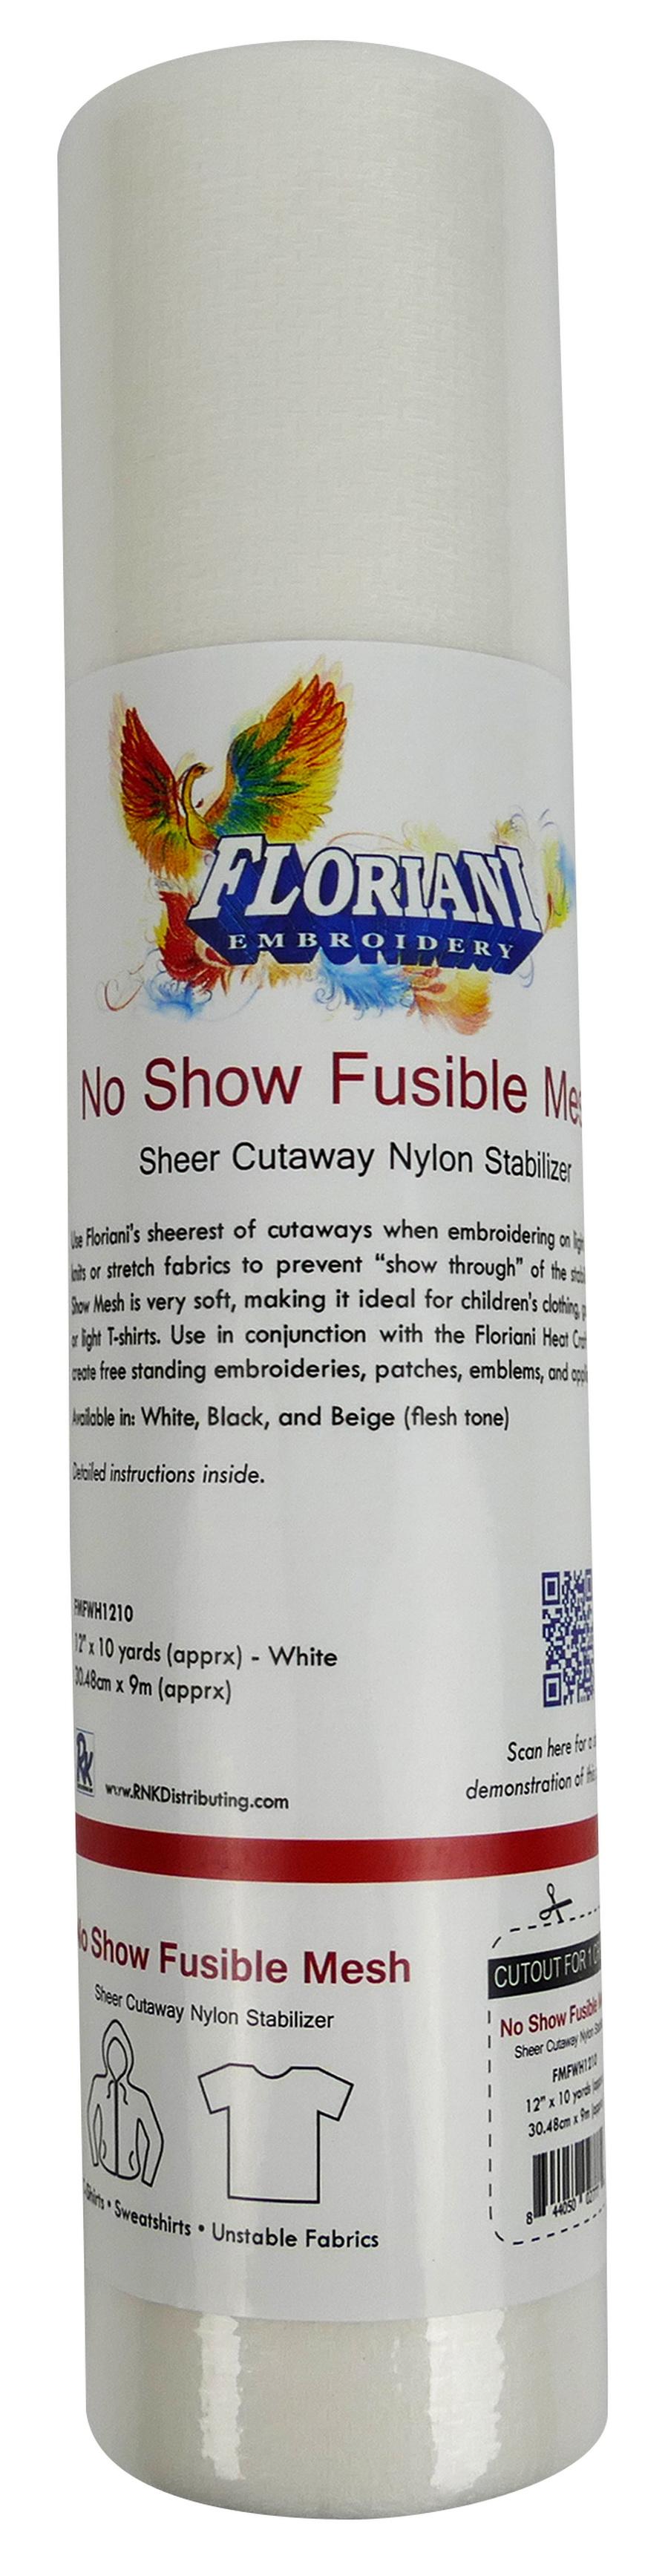 Floriani White No Show Mesh Fusible Stabilizer, 20 in. x 10 yds.